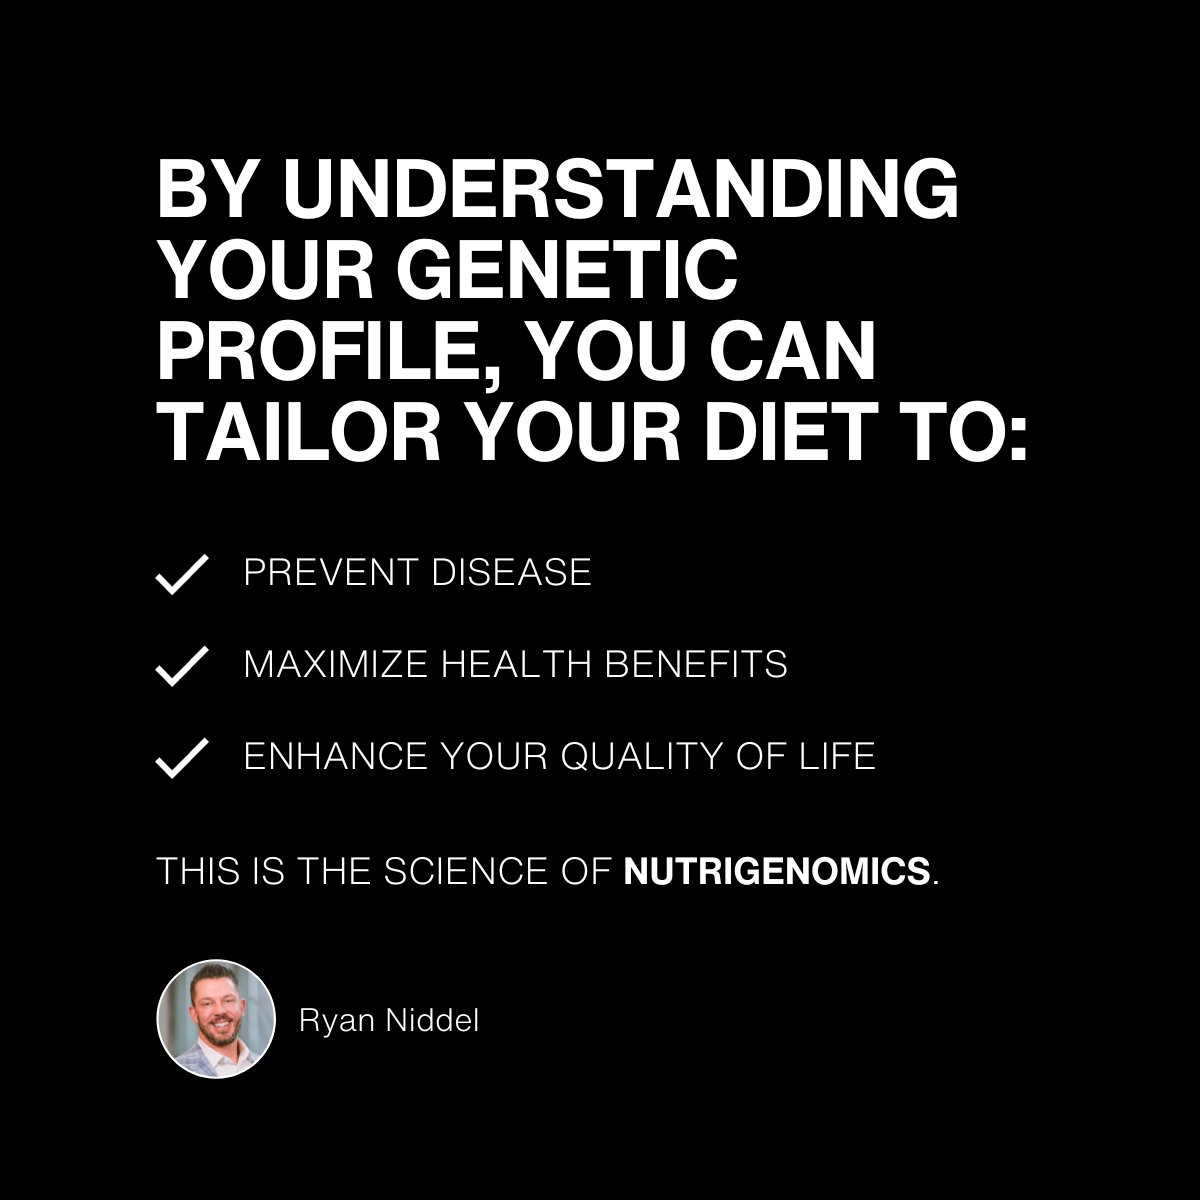 Diets are not one-size-fits-all, and here’s why:

The right diet can turn on genes that prevent disease, and turn off those that promote it.

But it all depends on your genetic profile… This is the science of “nutrigenomics.”

By understanding your genetic profile, you can…